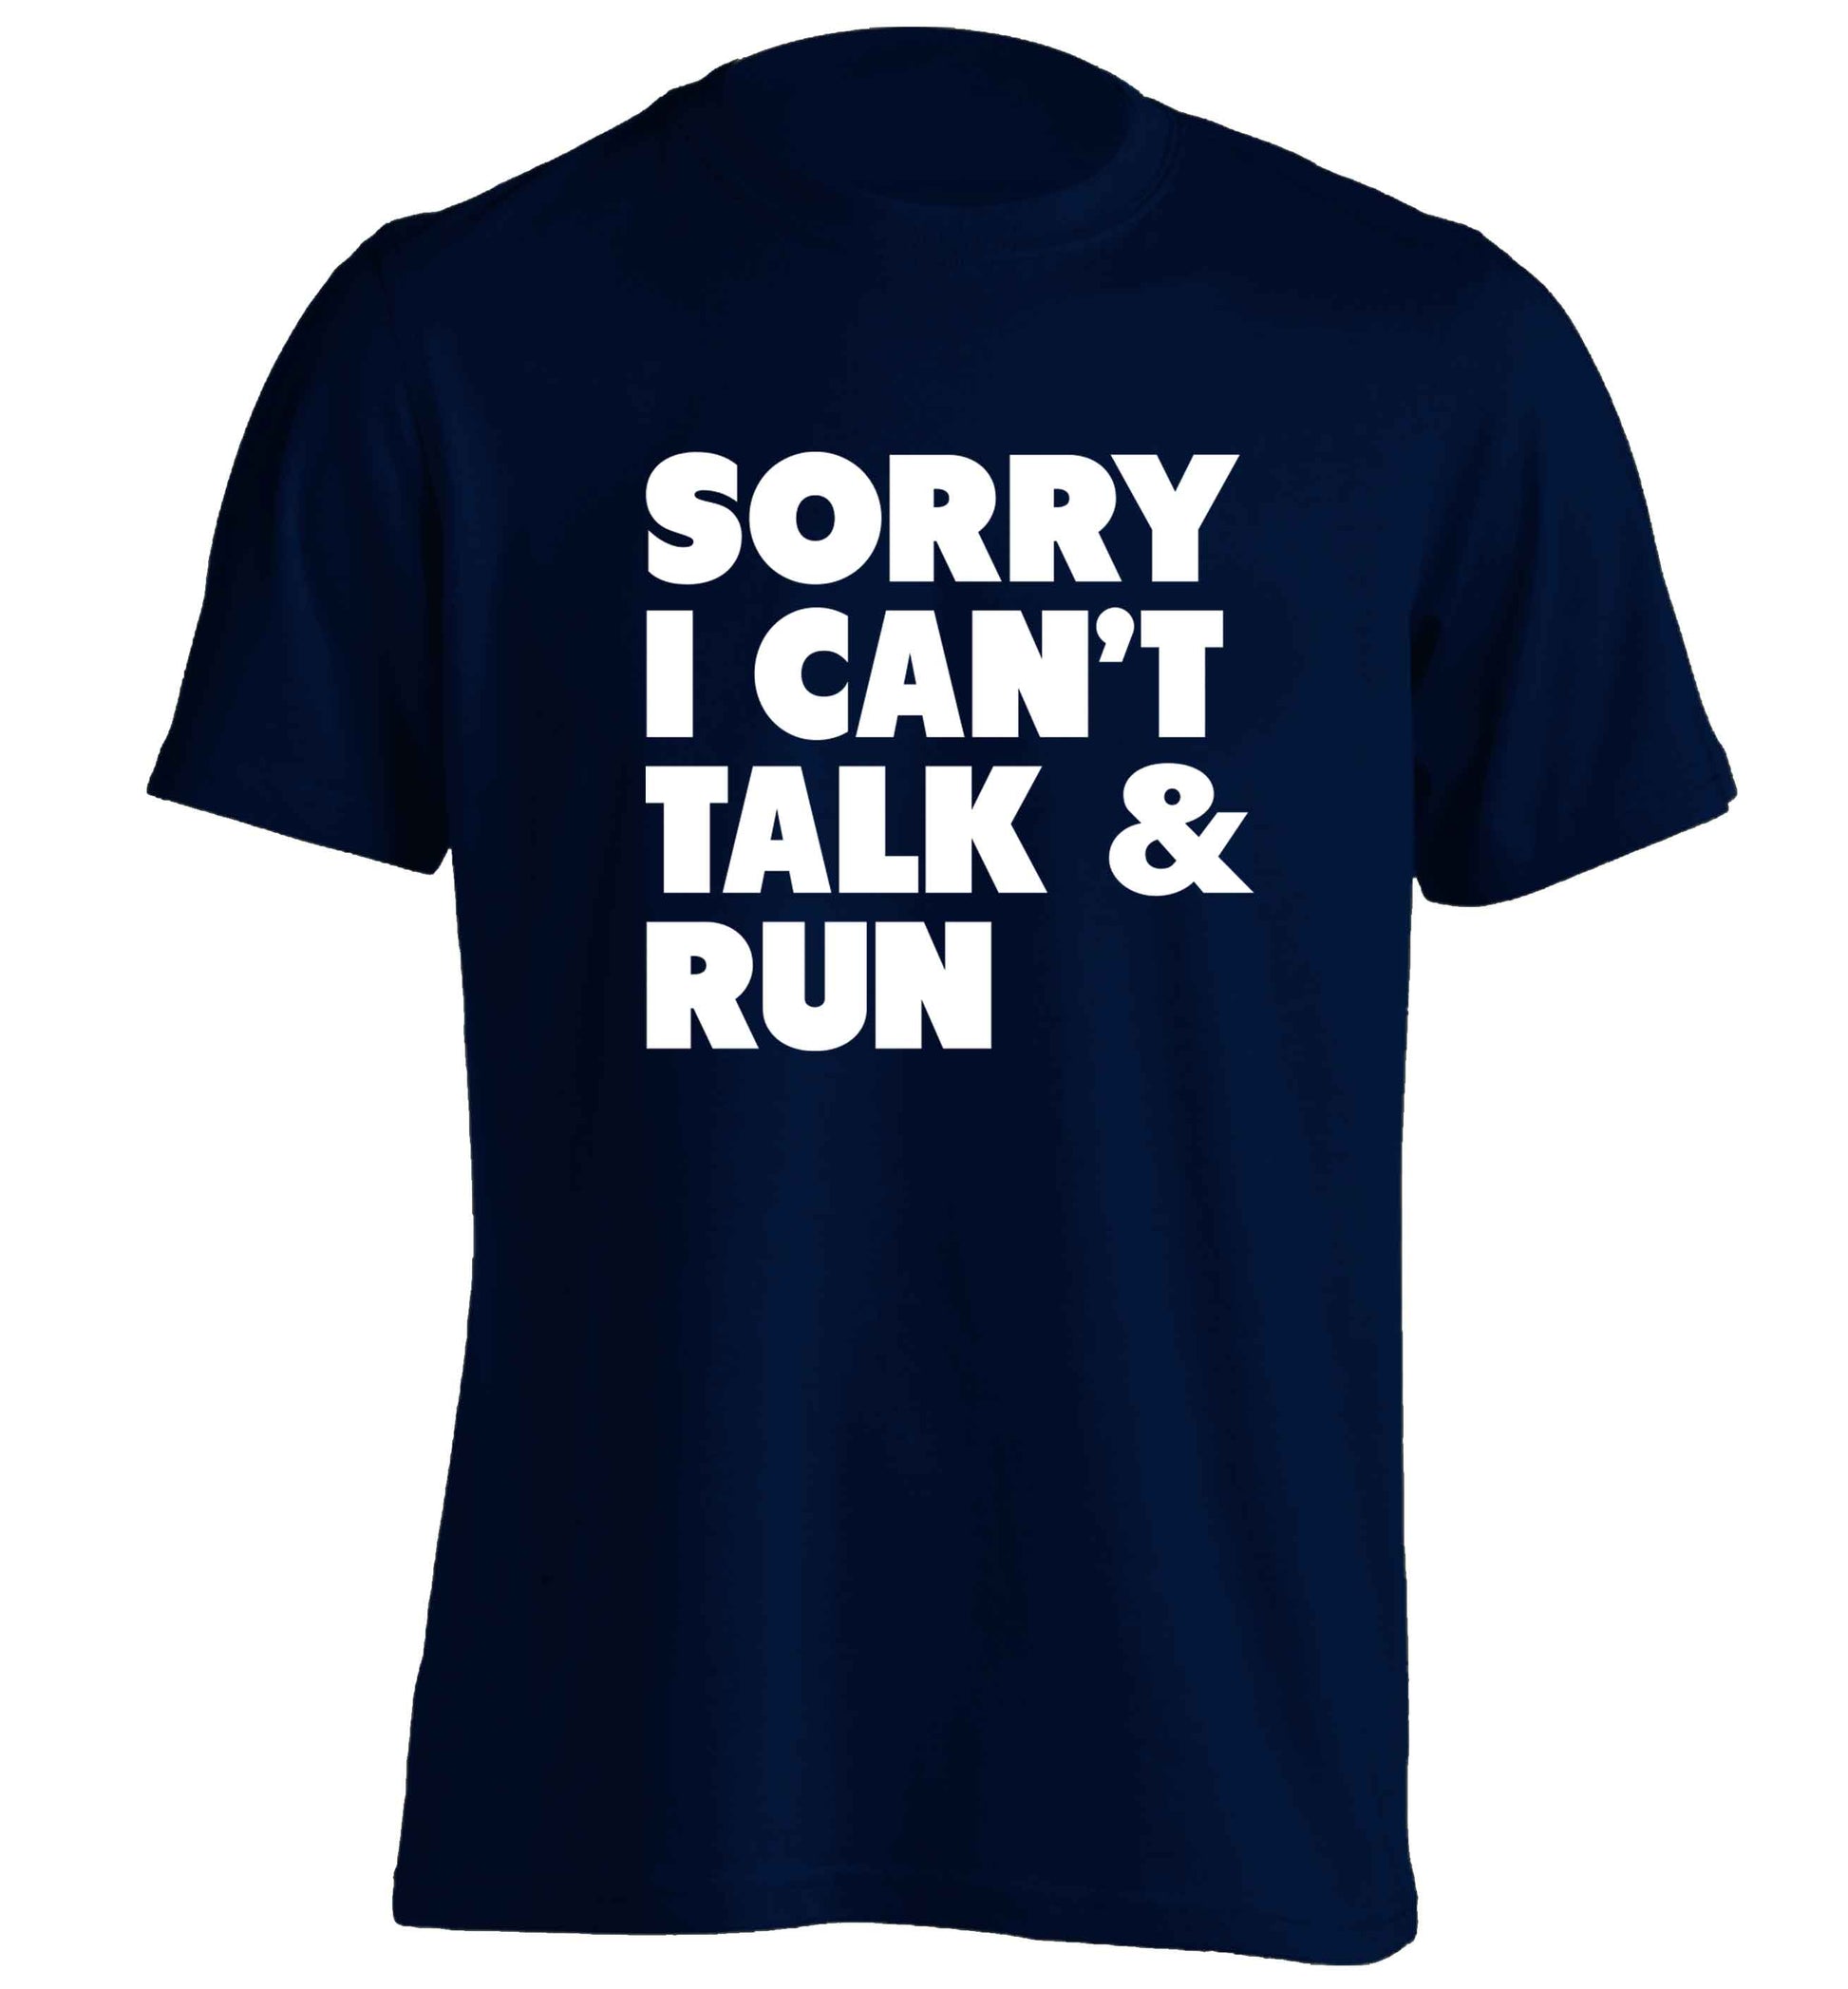 Sorry I can't talk and run adults unisex navy Tshirt 2XL